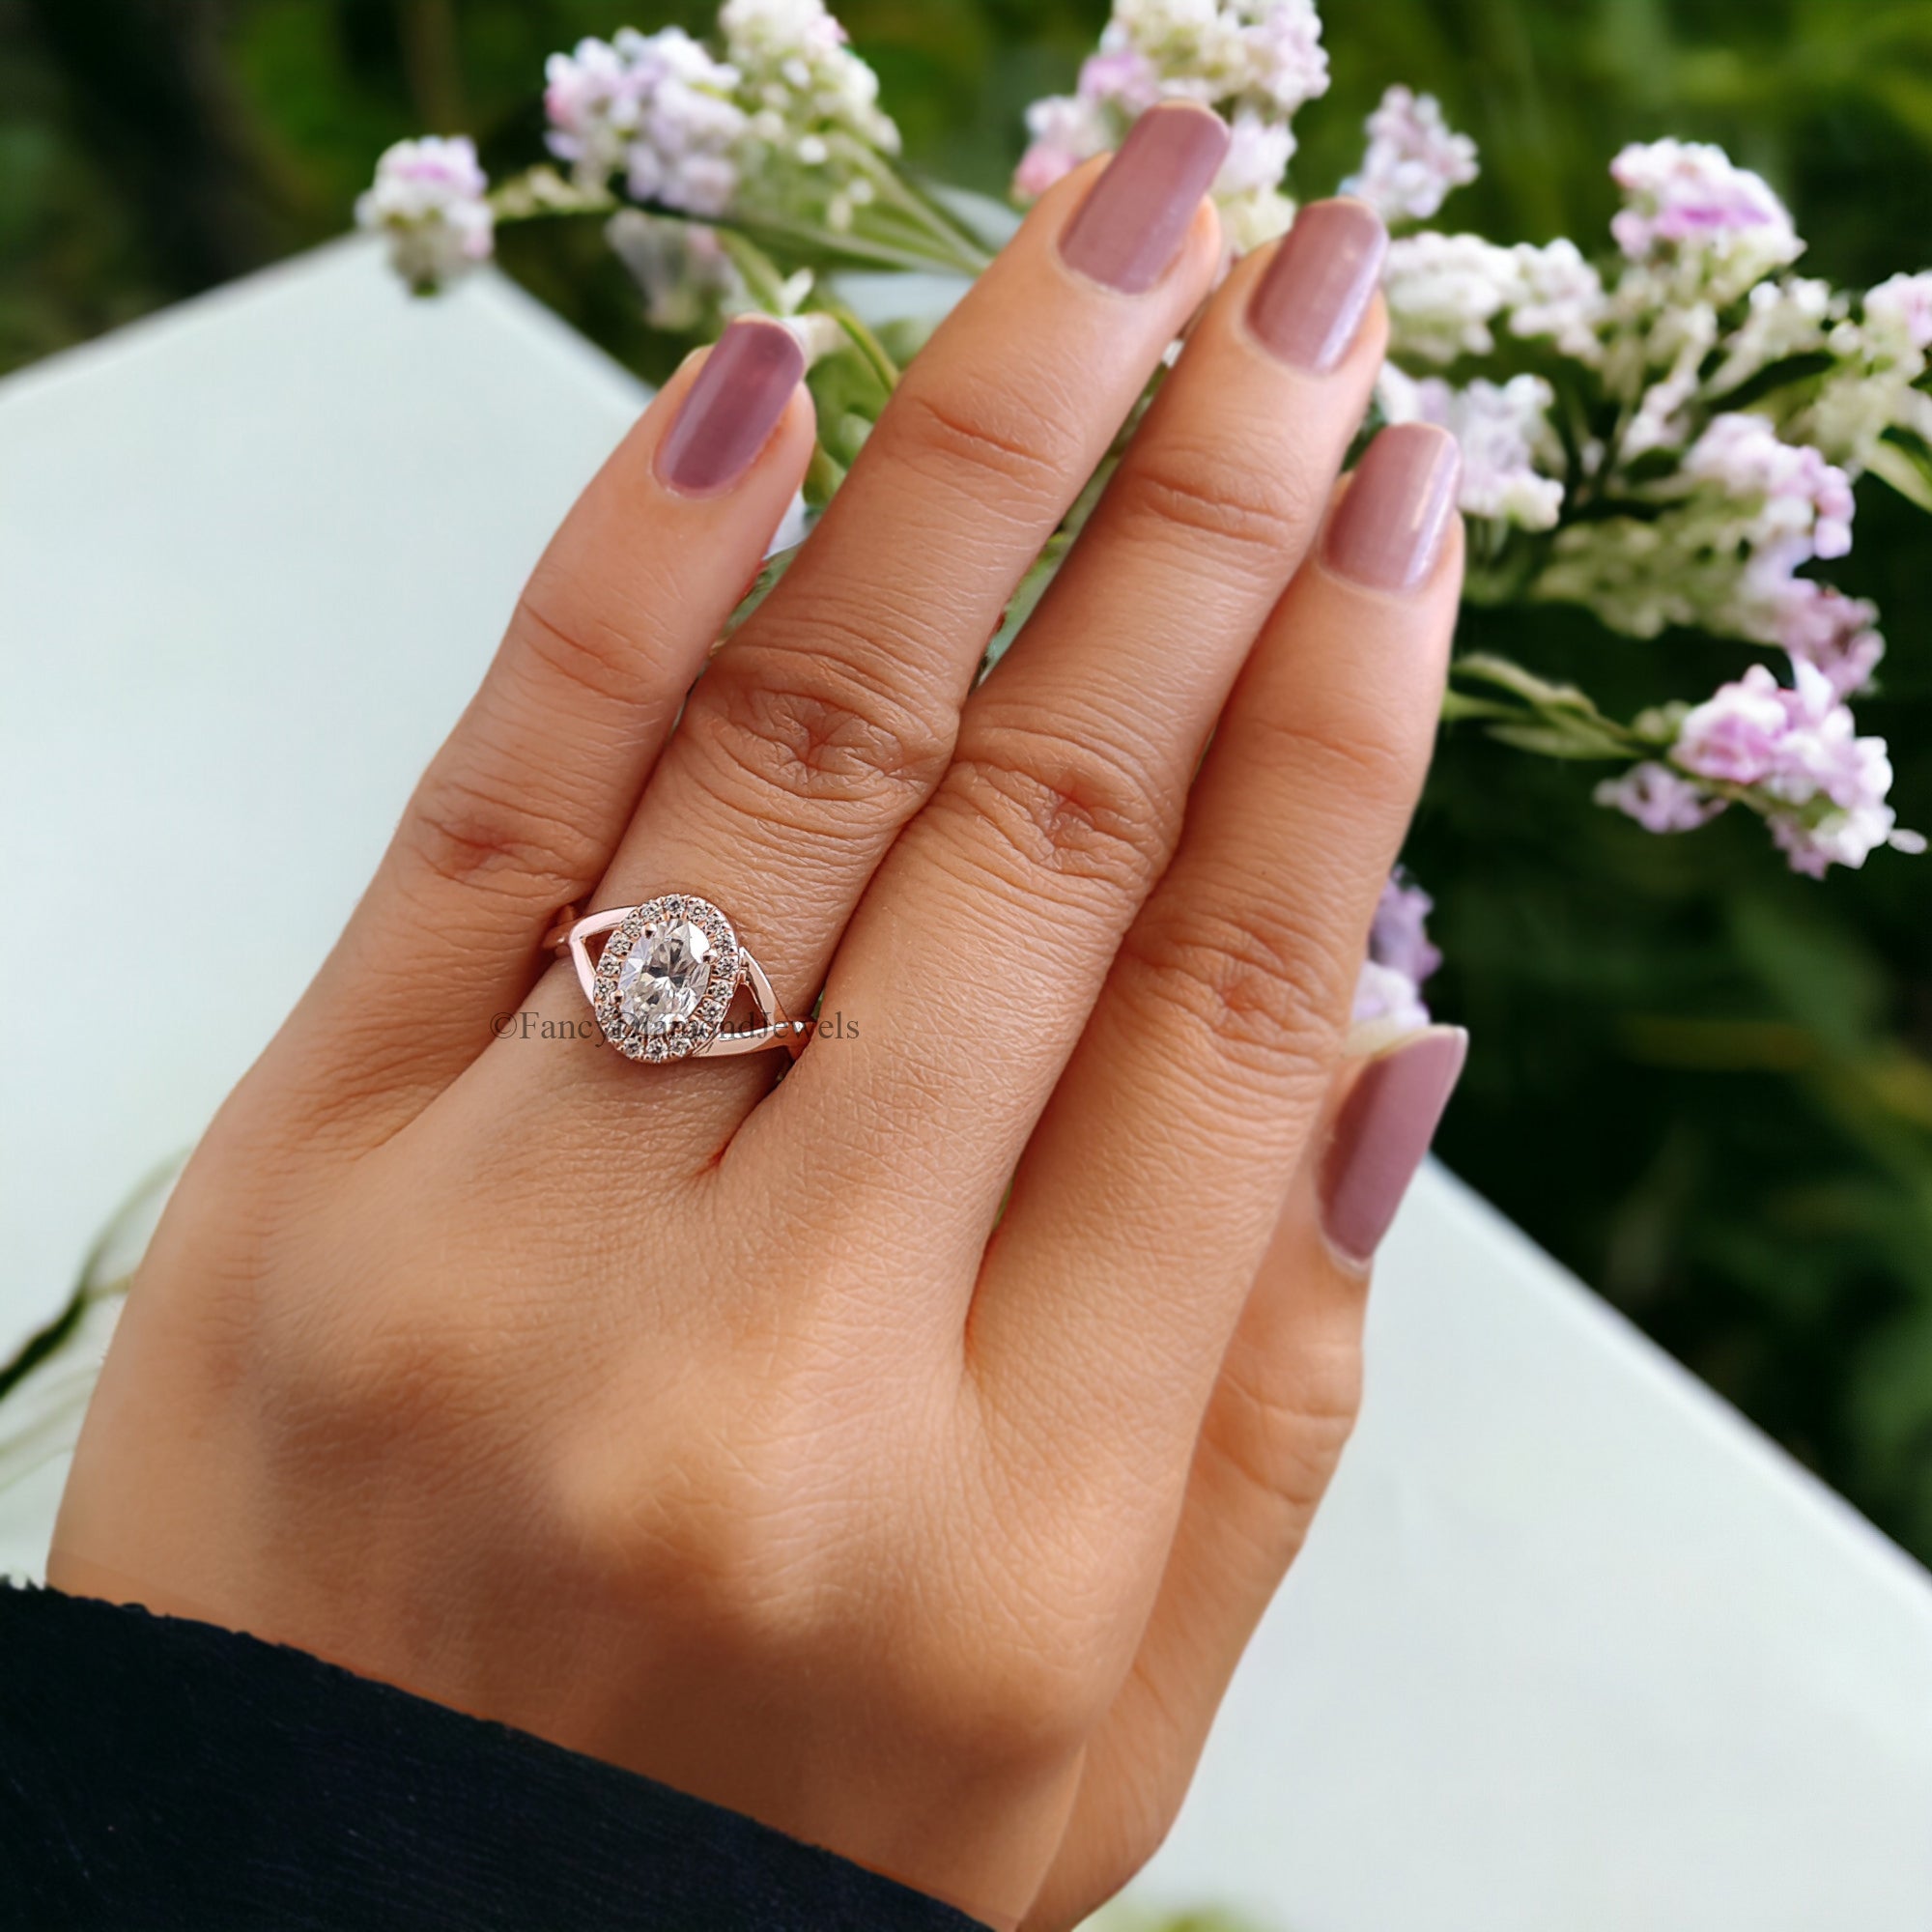 0.70 CT Oval Cut Moissanite Solitaire Ring 14K Rose Gold Engagement Ring Halo Setting Statement Ring Gift For Her Anniversary Ring FD96